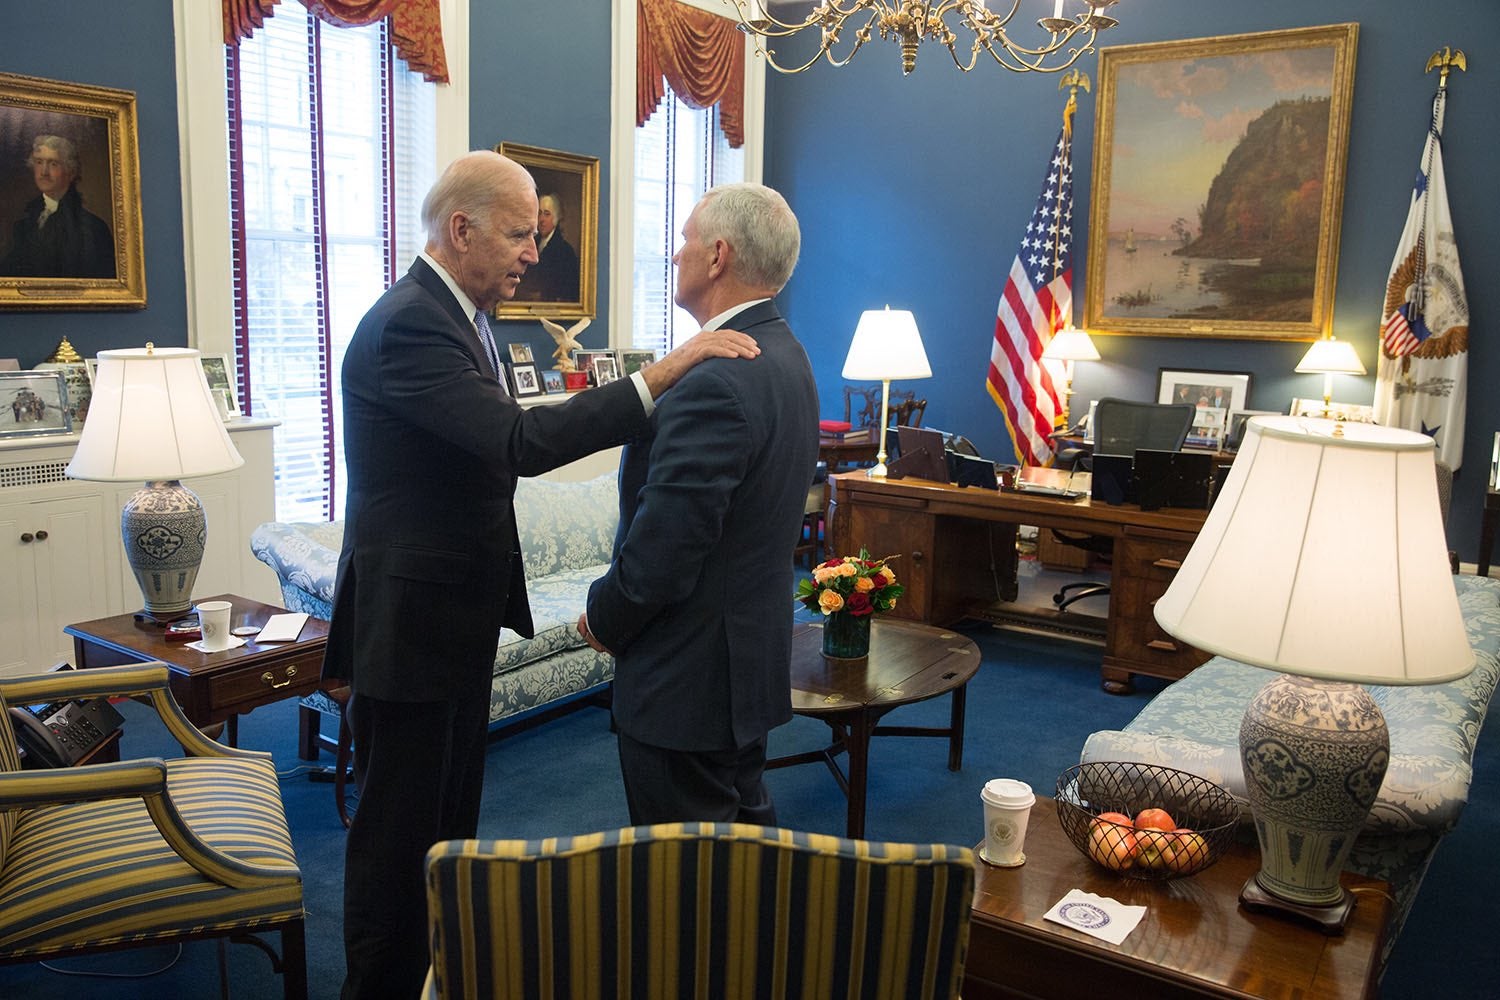 Photo resurfaces of Biden welcoming Pence to White House for 'smooth transition of power'